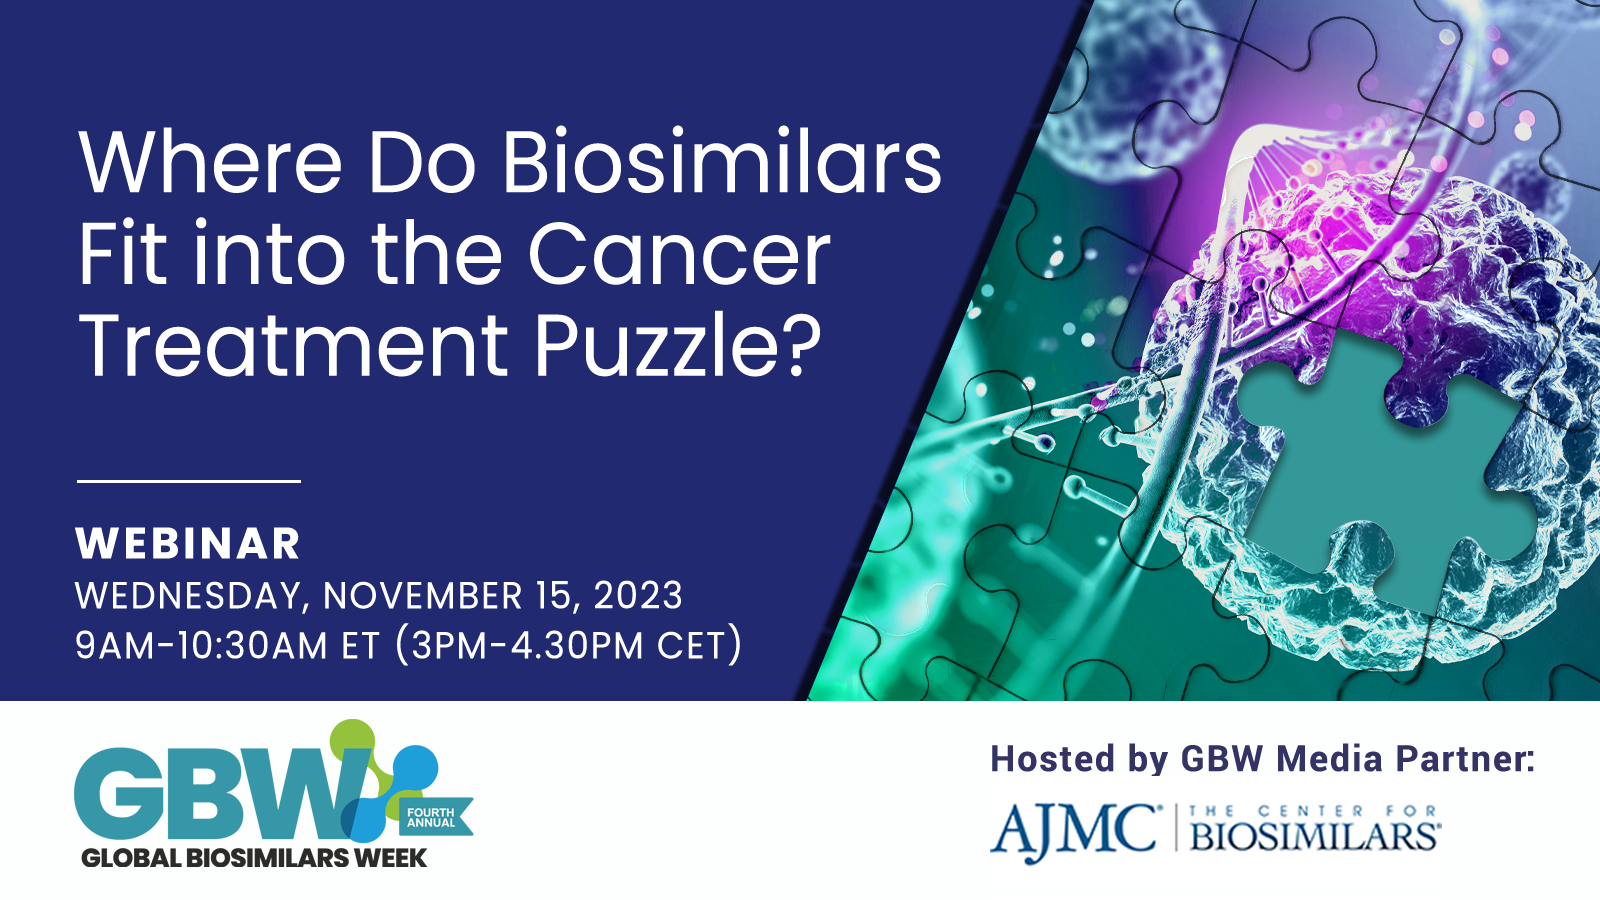 "Where Do Biosimilars Fit into the Cancer Treatment Puzzle?" is a live global webinar hosted by IGBA and The Center for Biosimilars® in honor of Global Biosimilars Week (November 13-17, 2023). The webinar will take place on November 15, 2023, from 9:00am to 10:30am ET (3:00pm to 4:30pm CET).